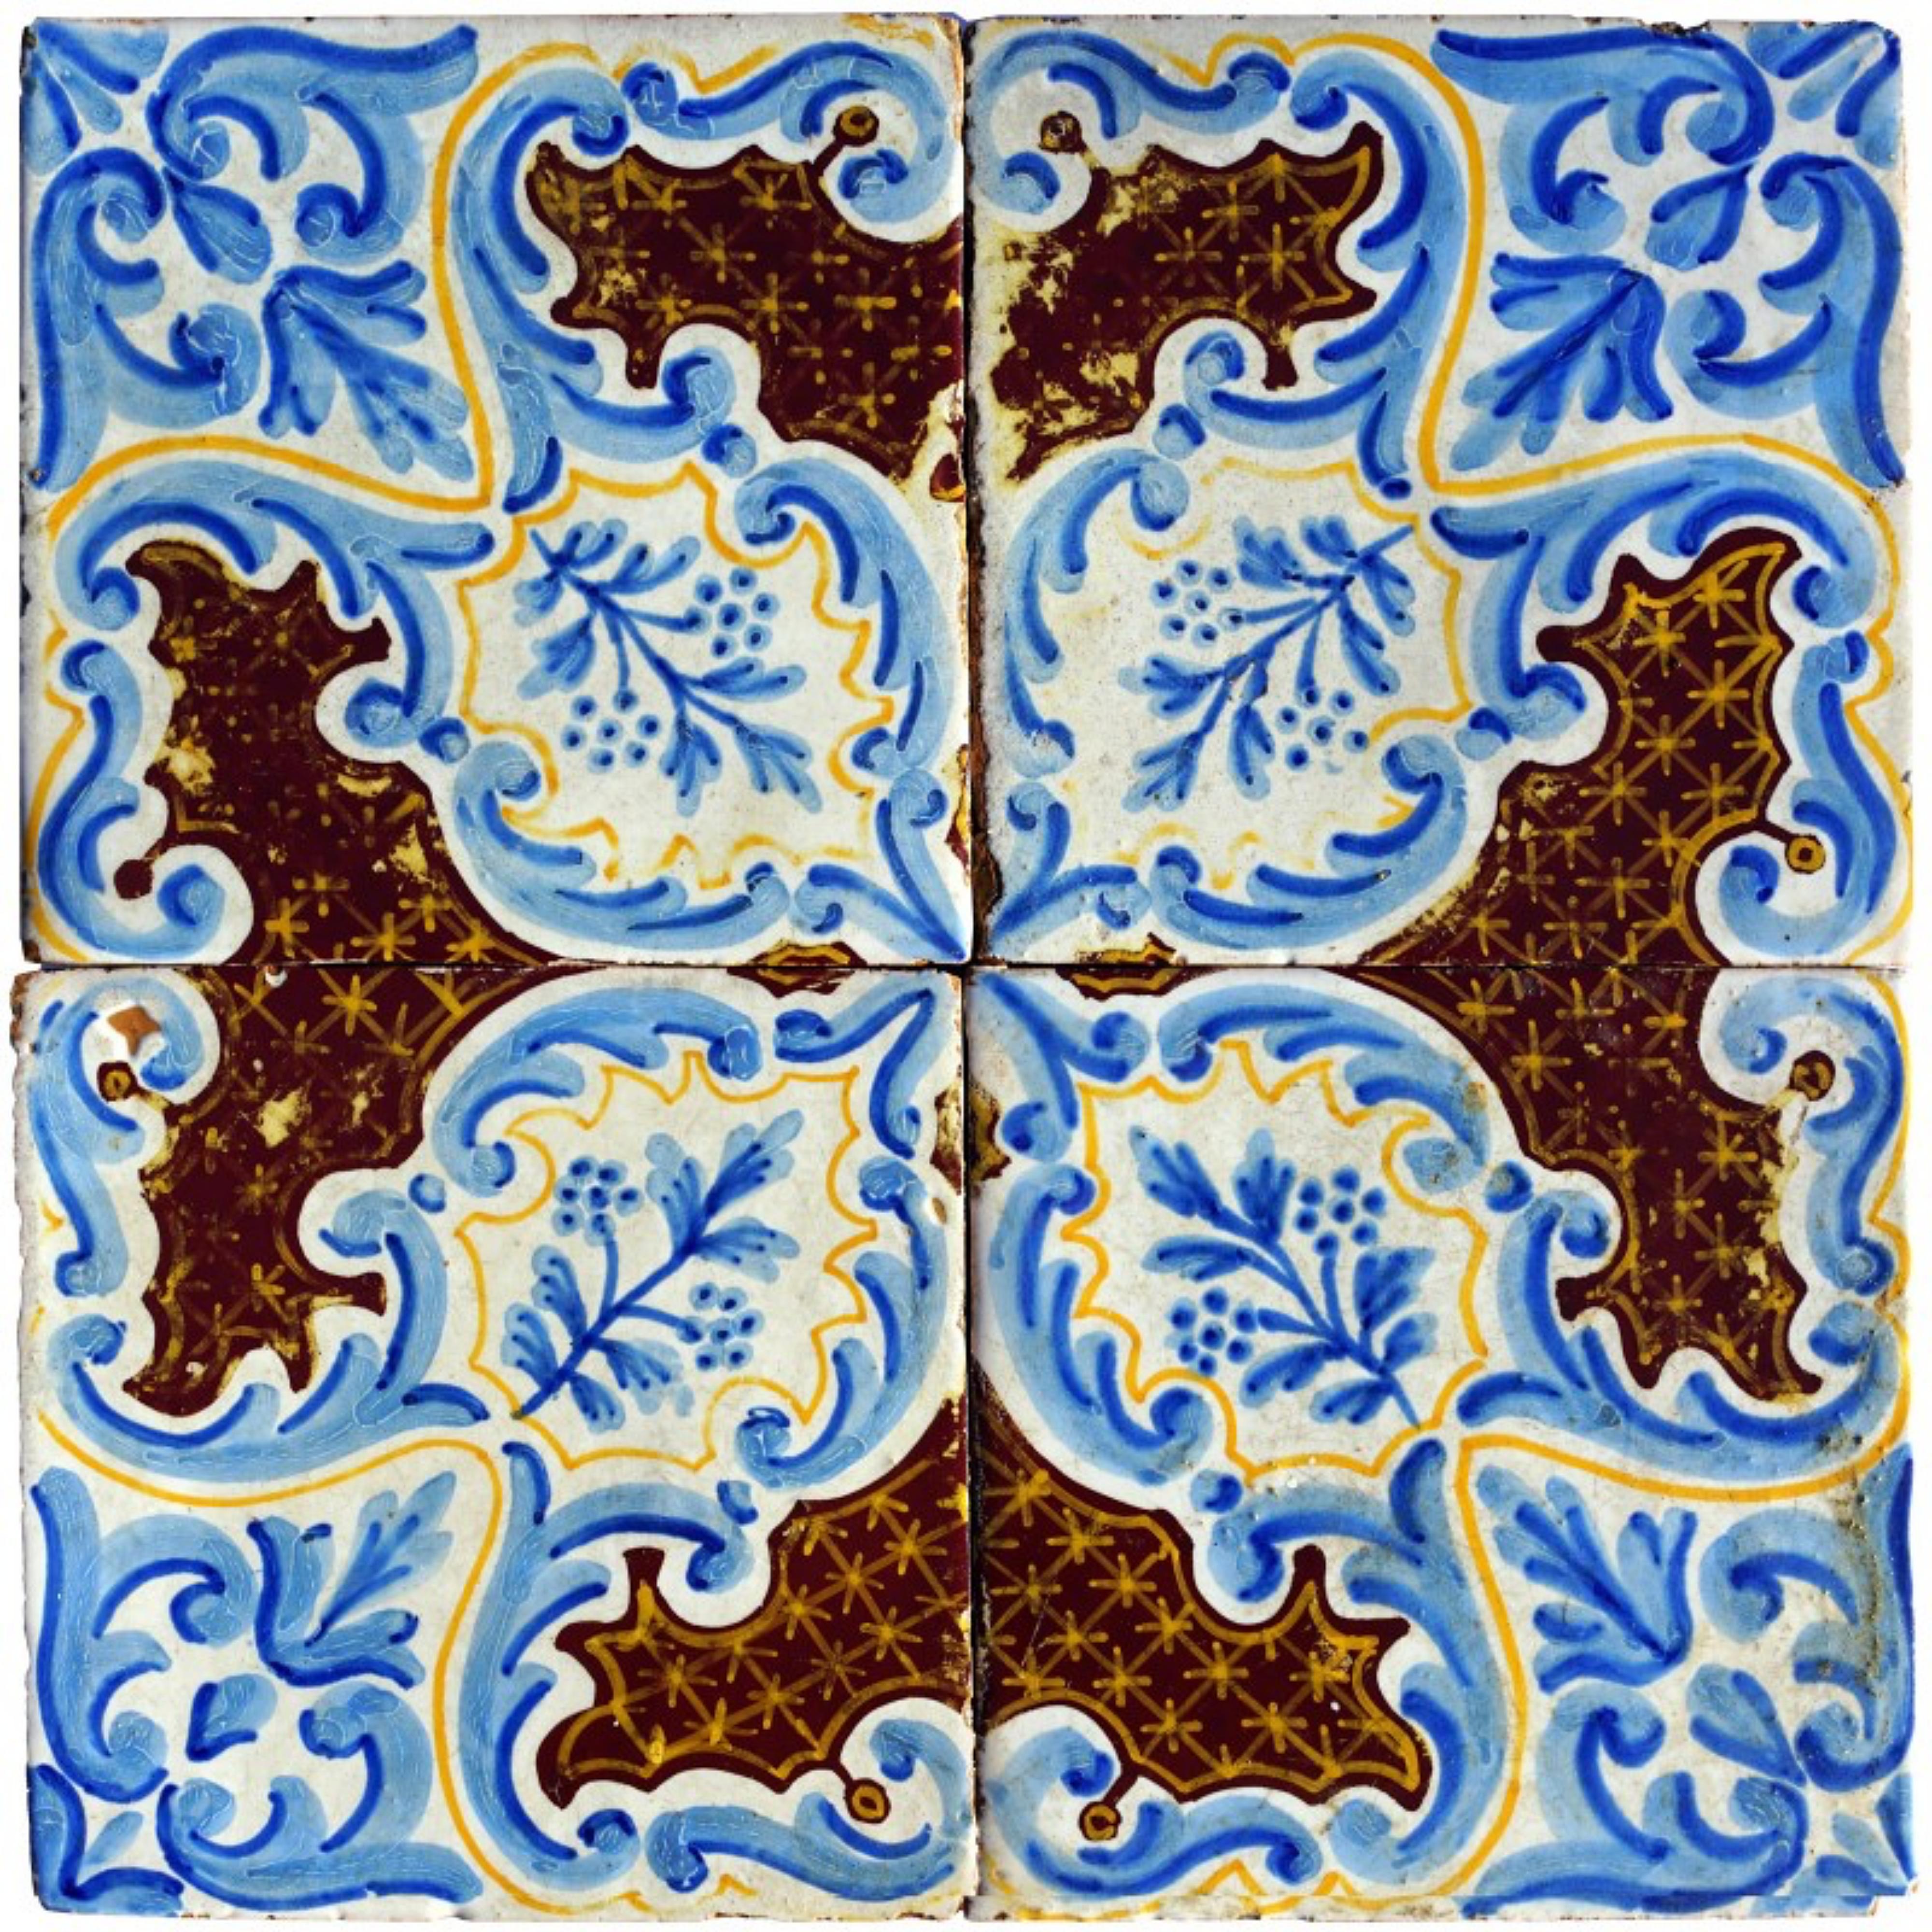 Italian 24 ANCIENT MAJOLICA TILES FROM THE LIBERTY ERA 1894 / 1910 Art Nouveau For Sale